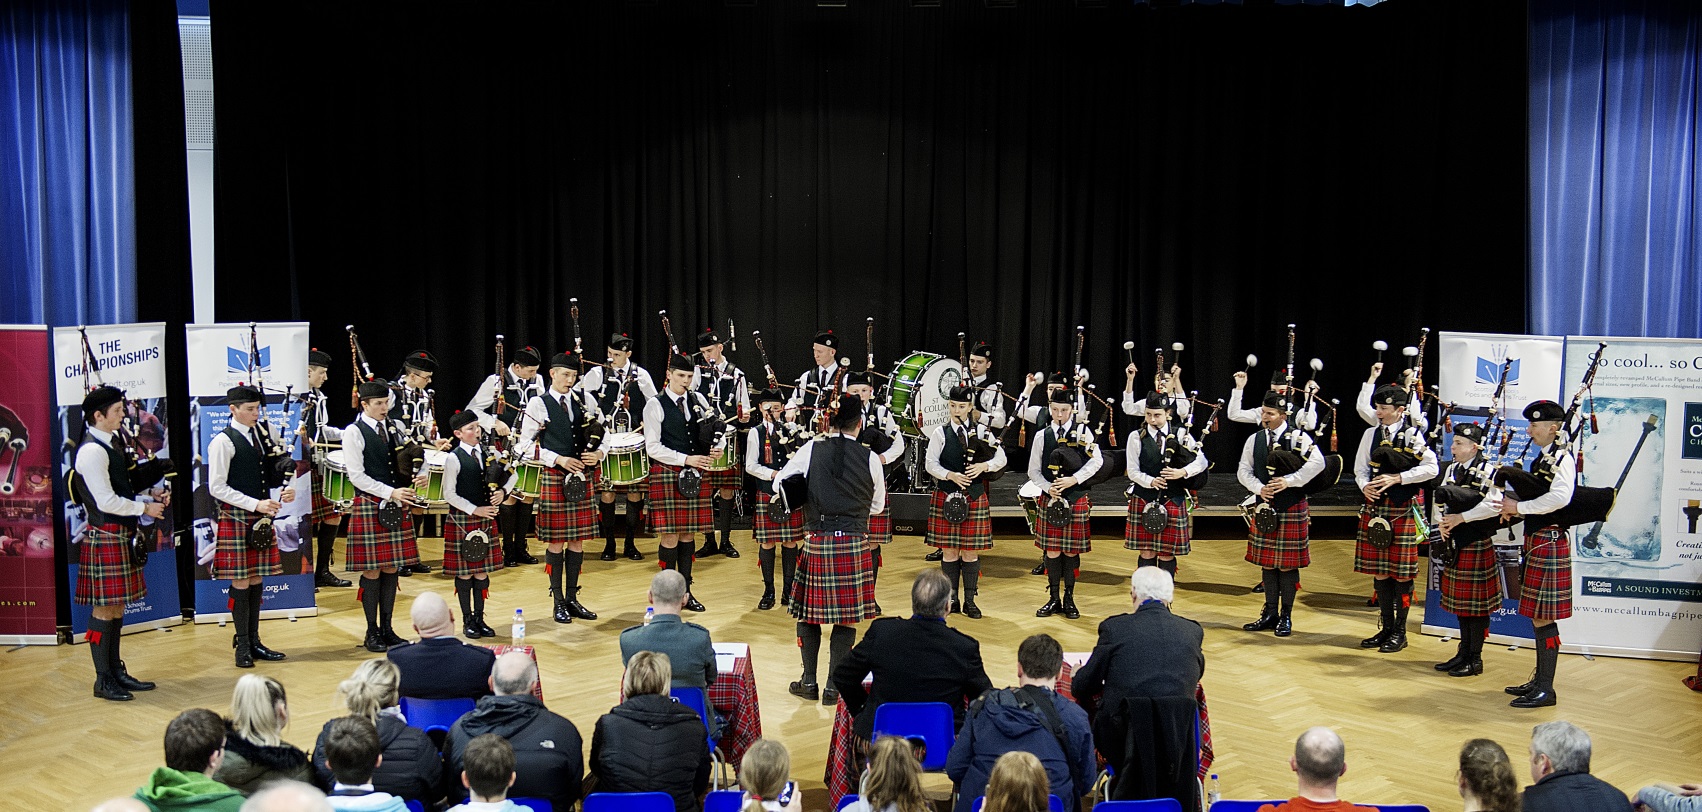 St Columba's Competes at Scottish Schools' Pipe Band Championships